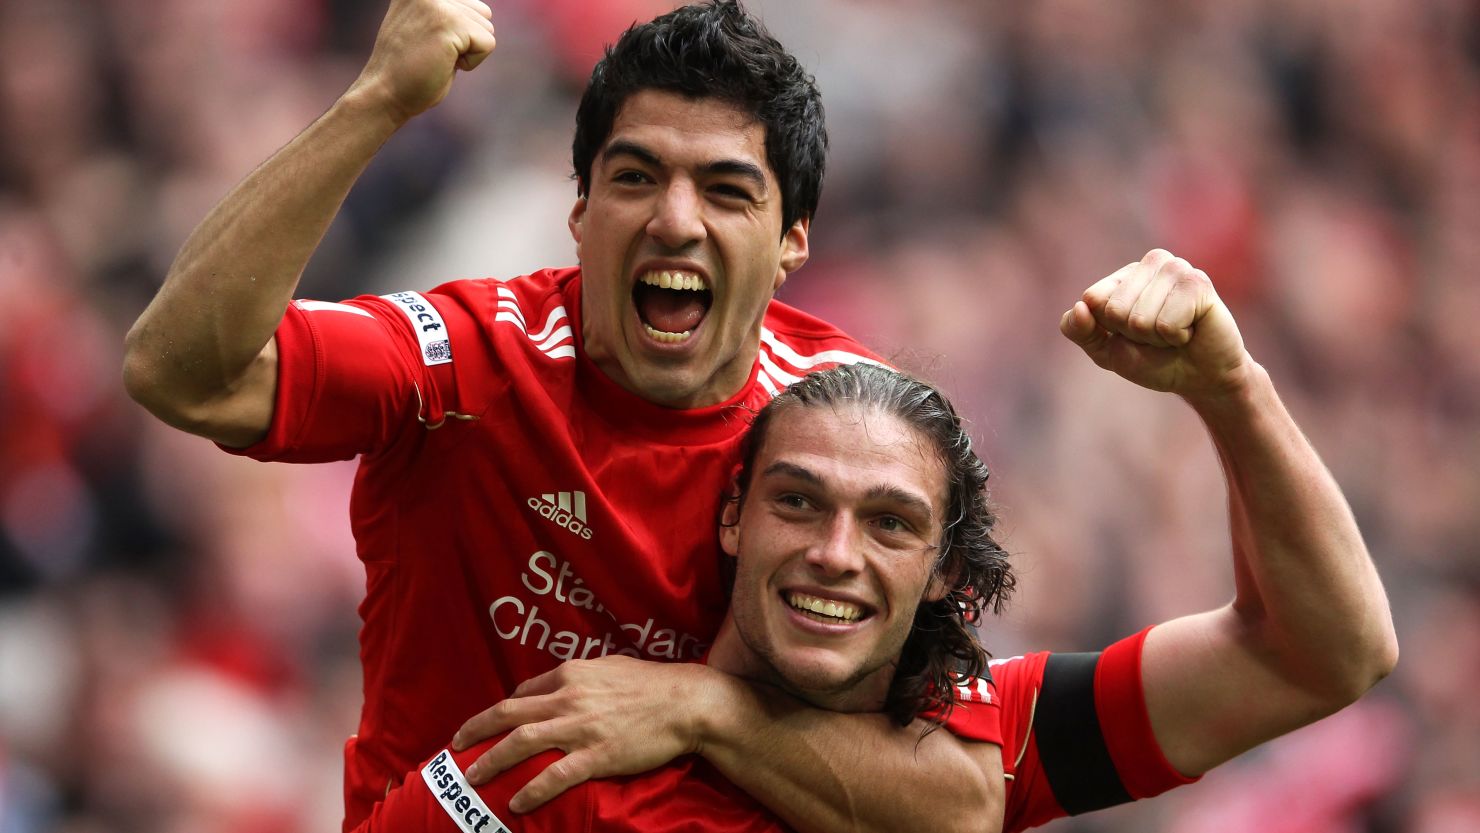 Liverpool's Andy Carroll (r) celebrates with Luis Suarez after scoring the winning goal against Everton in the FA Cup semifinal 